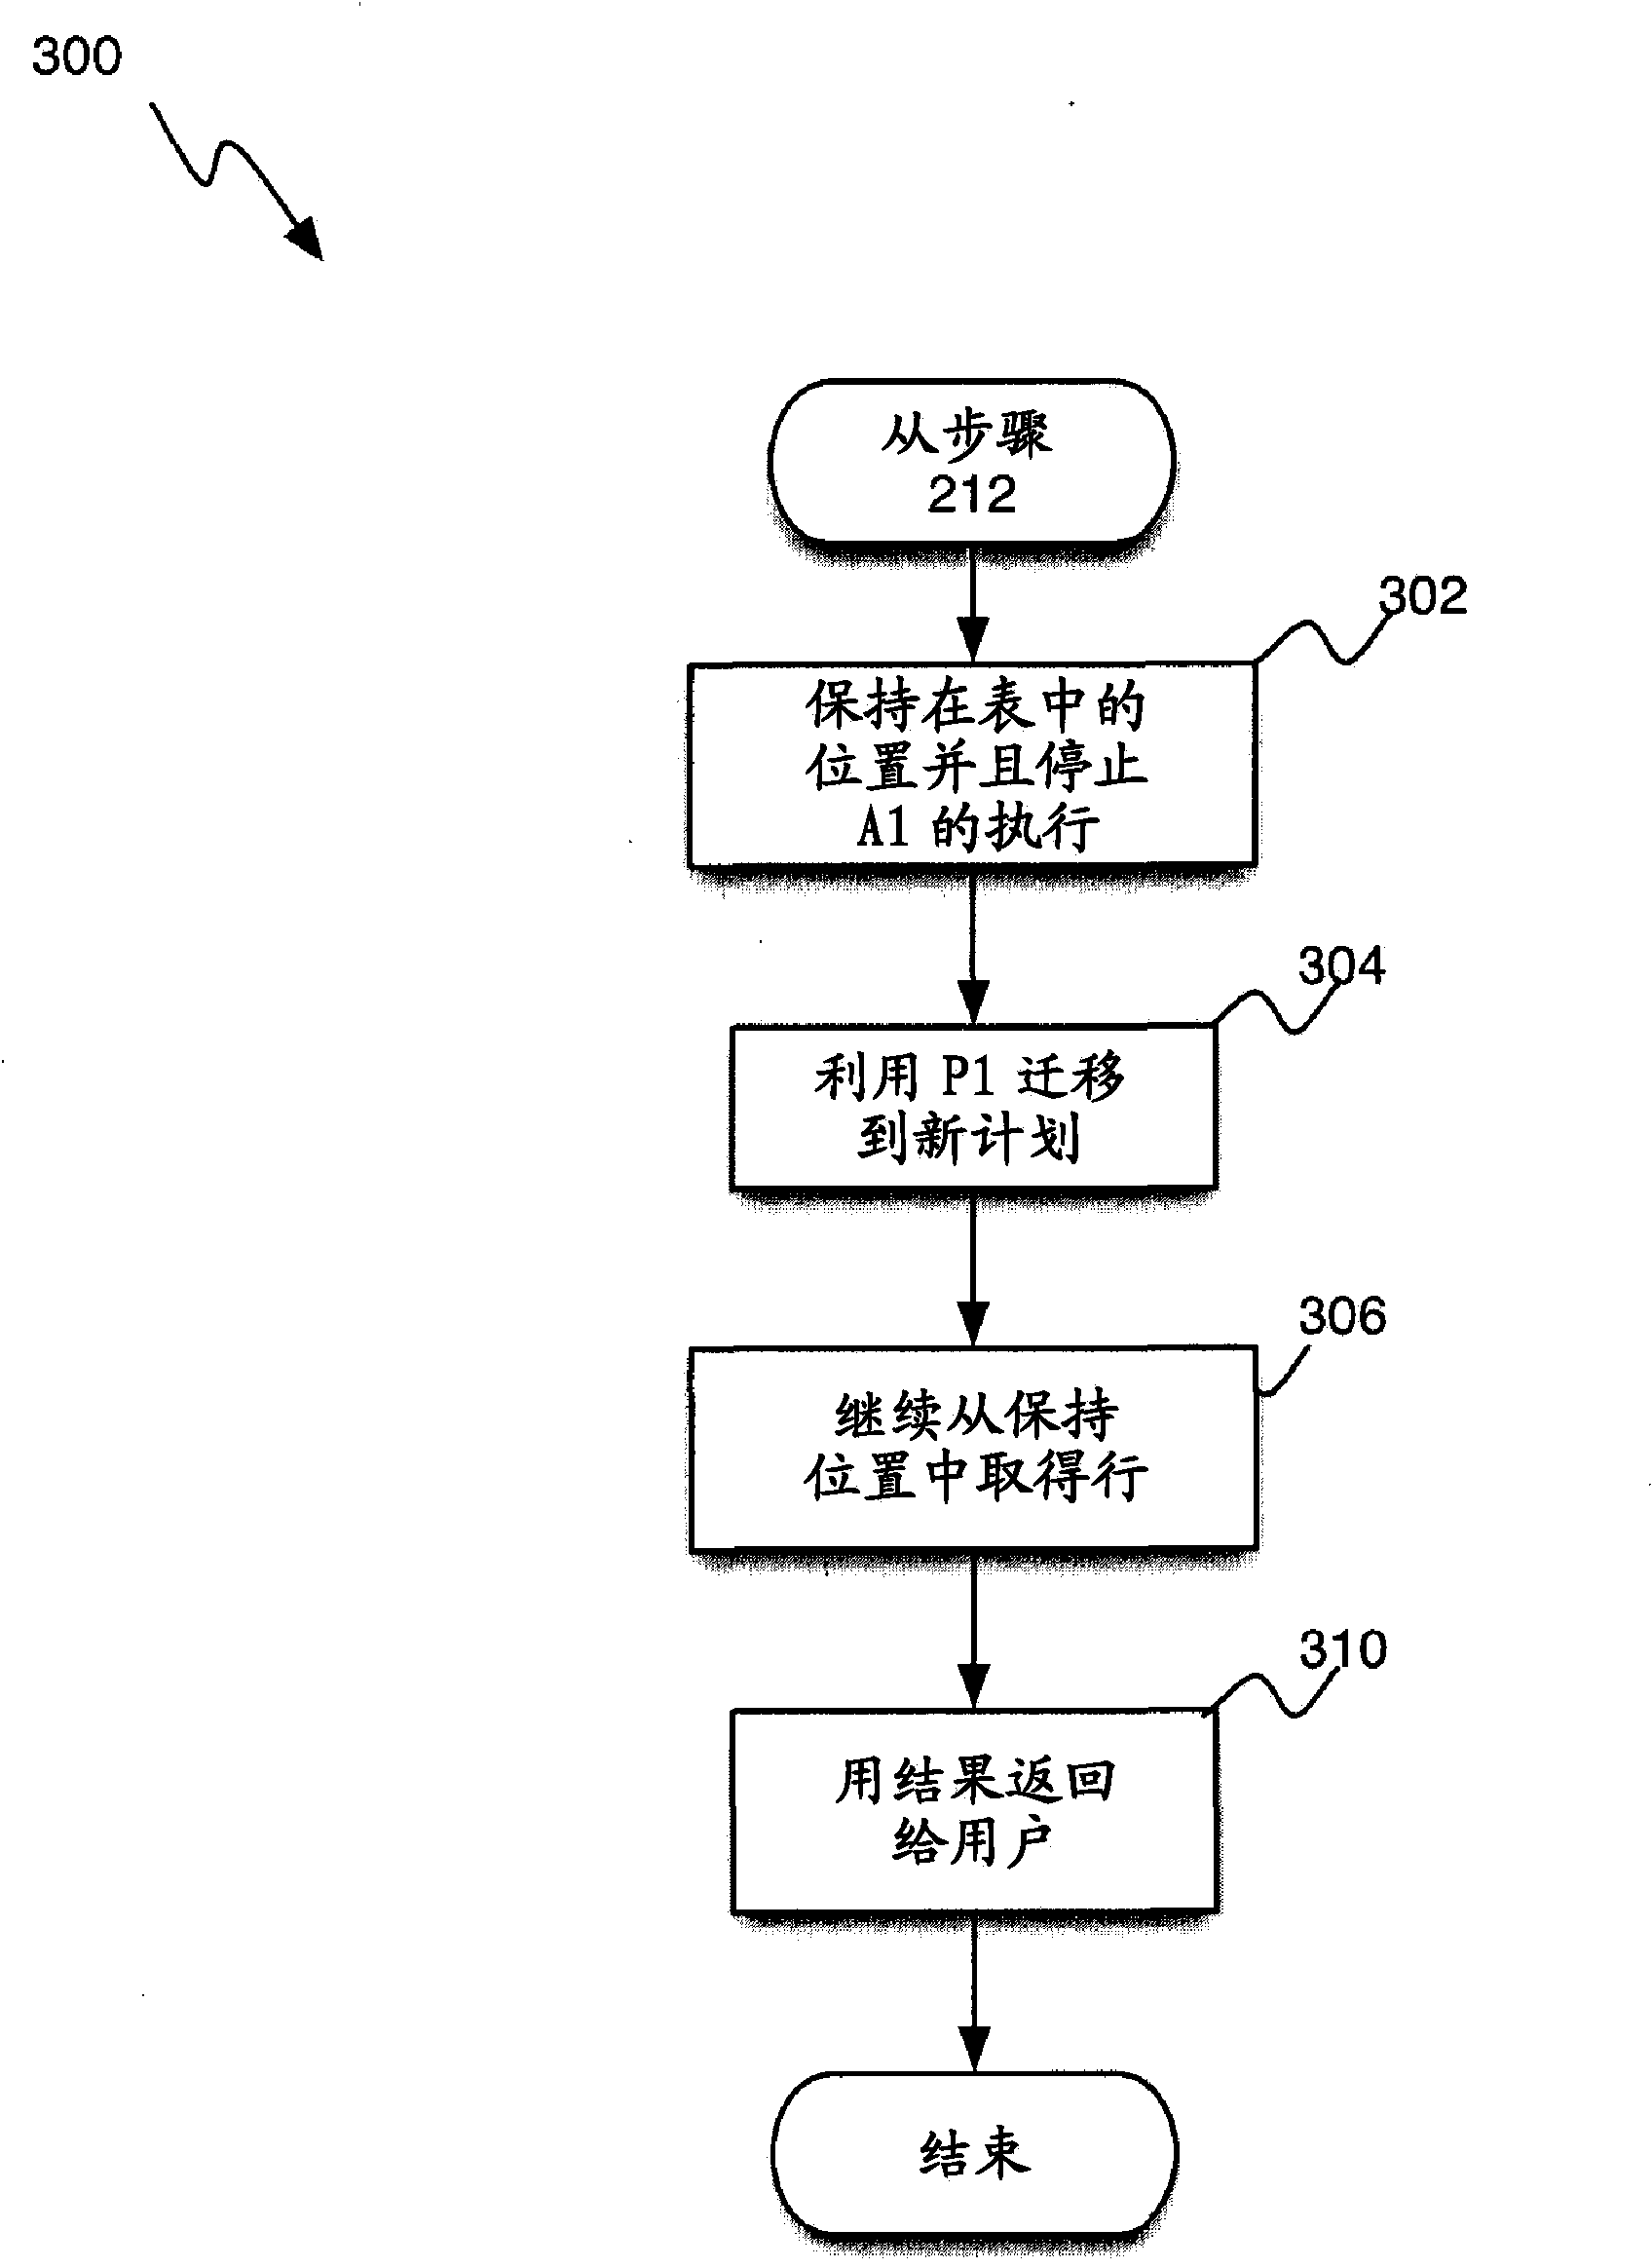 Method and system by using temporary performance objects for enhanced query performance